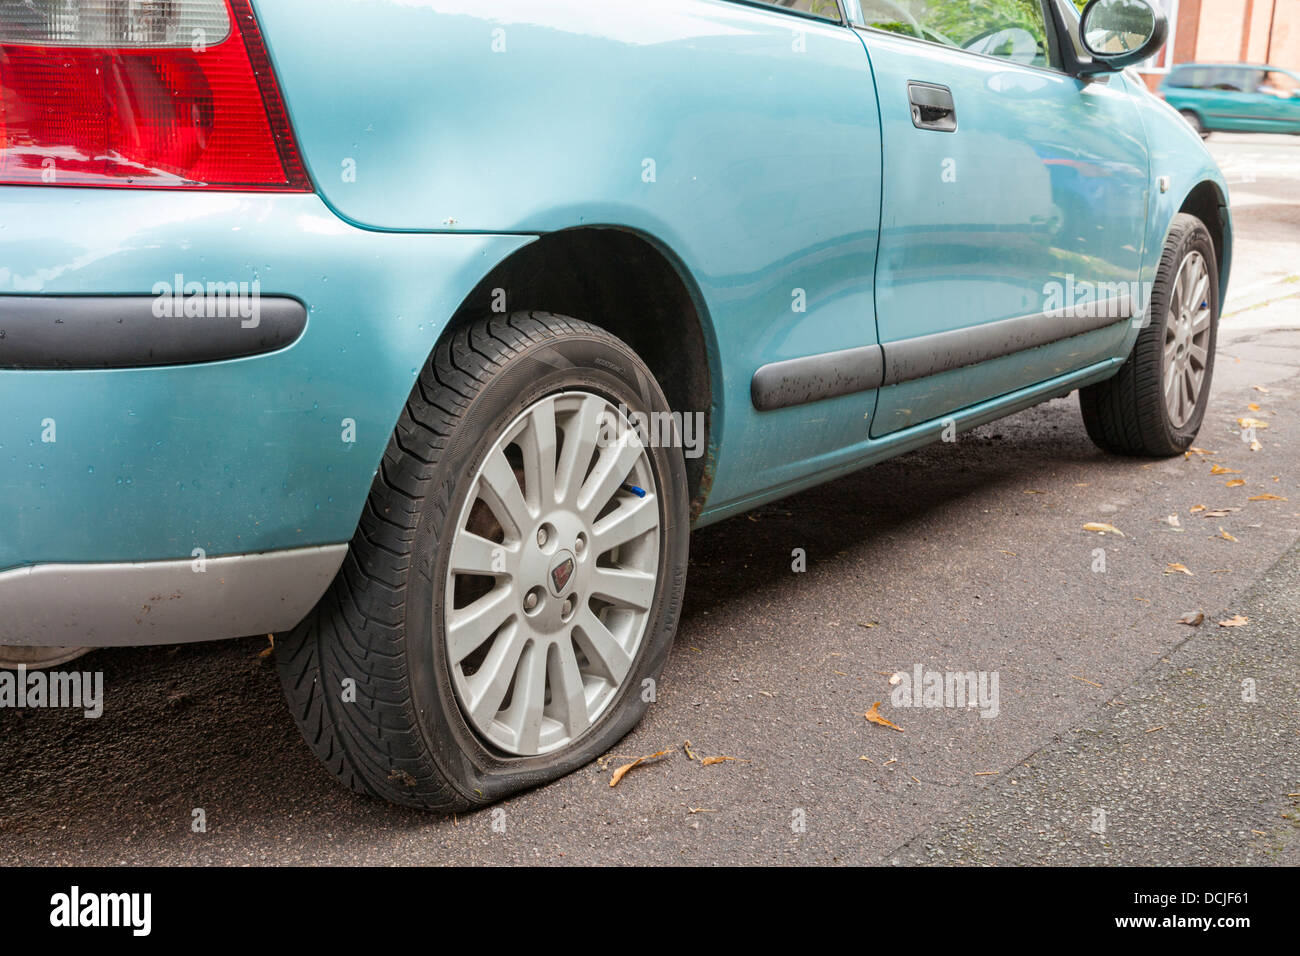 Punctured tyre. Car at the roadside with a flat tyre, England, UK Stock Photo